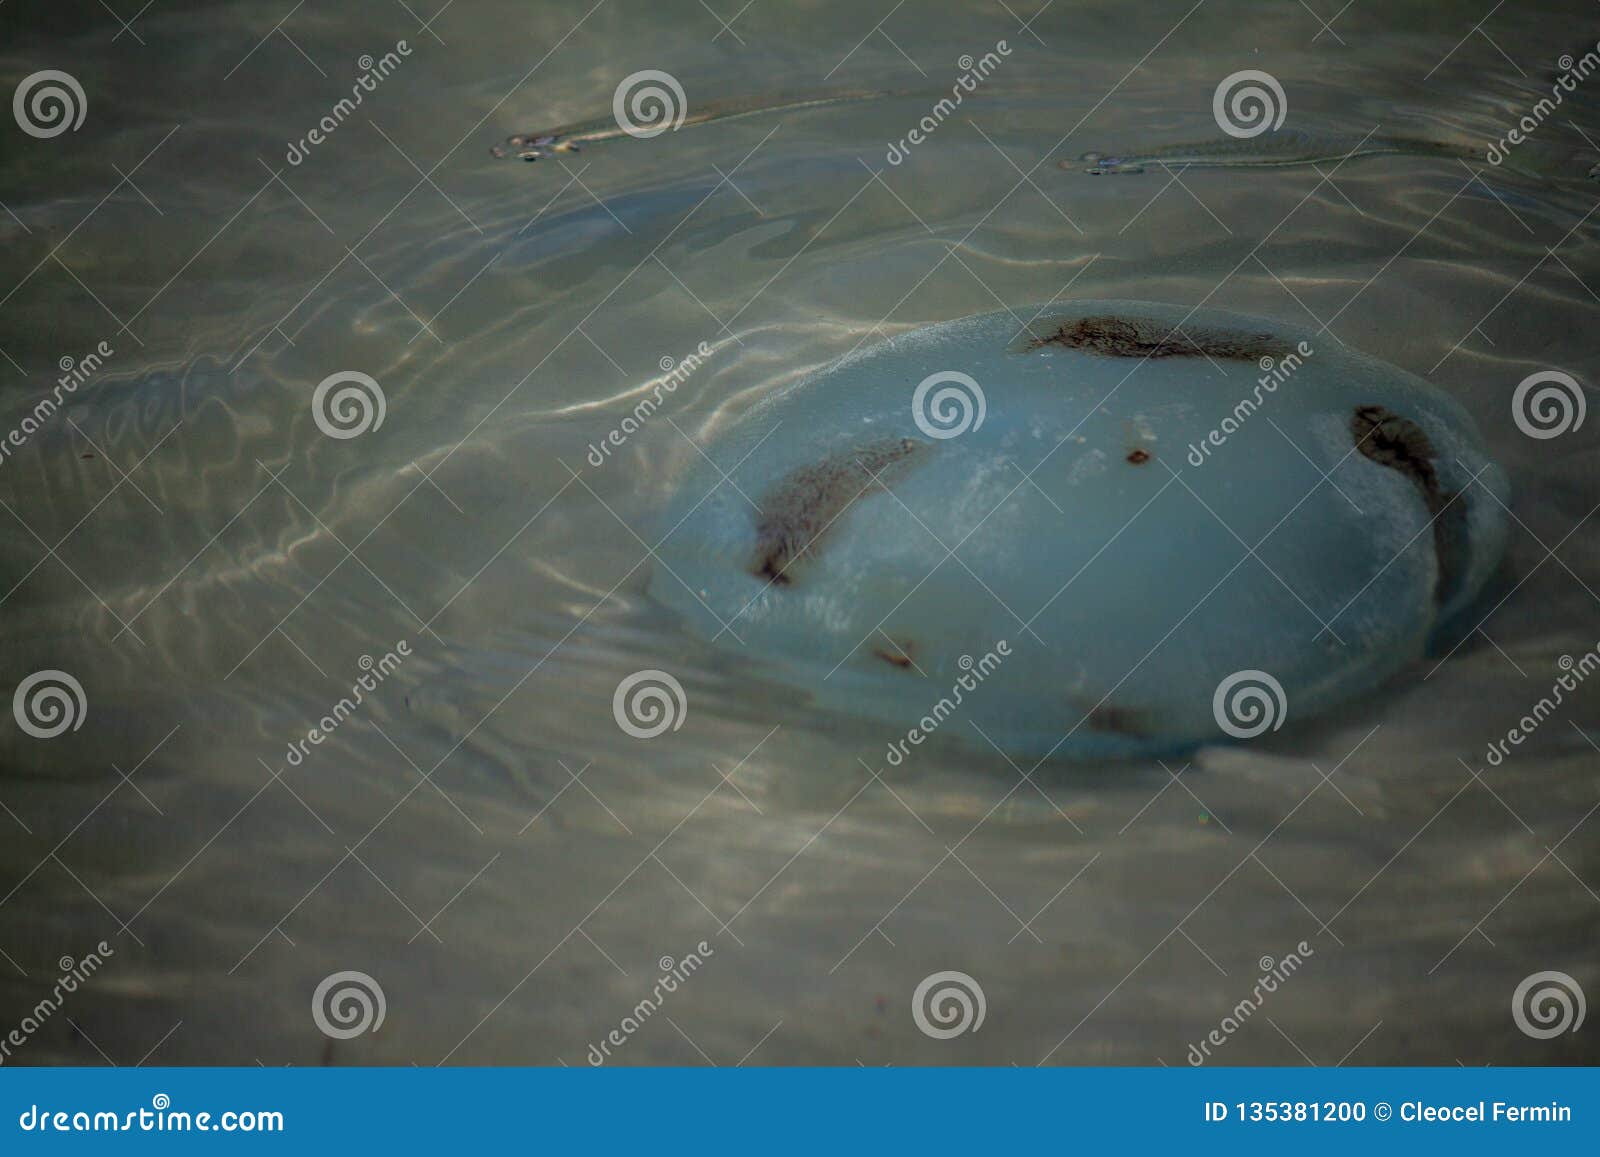 beatiful and natural bad water animal in the beach in coche island in venezuela